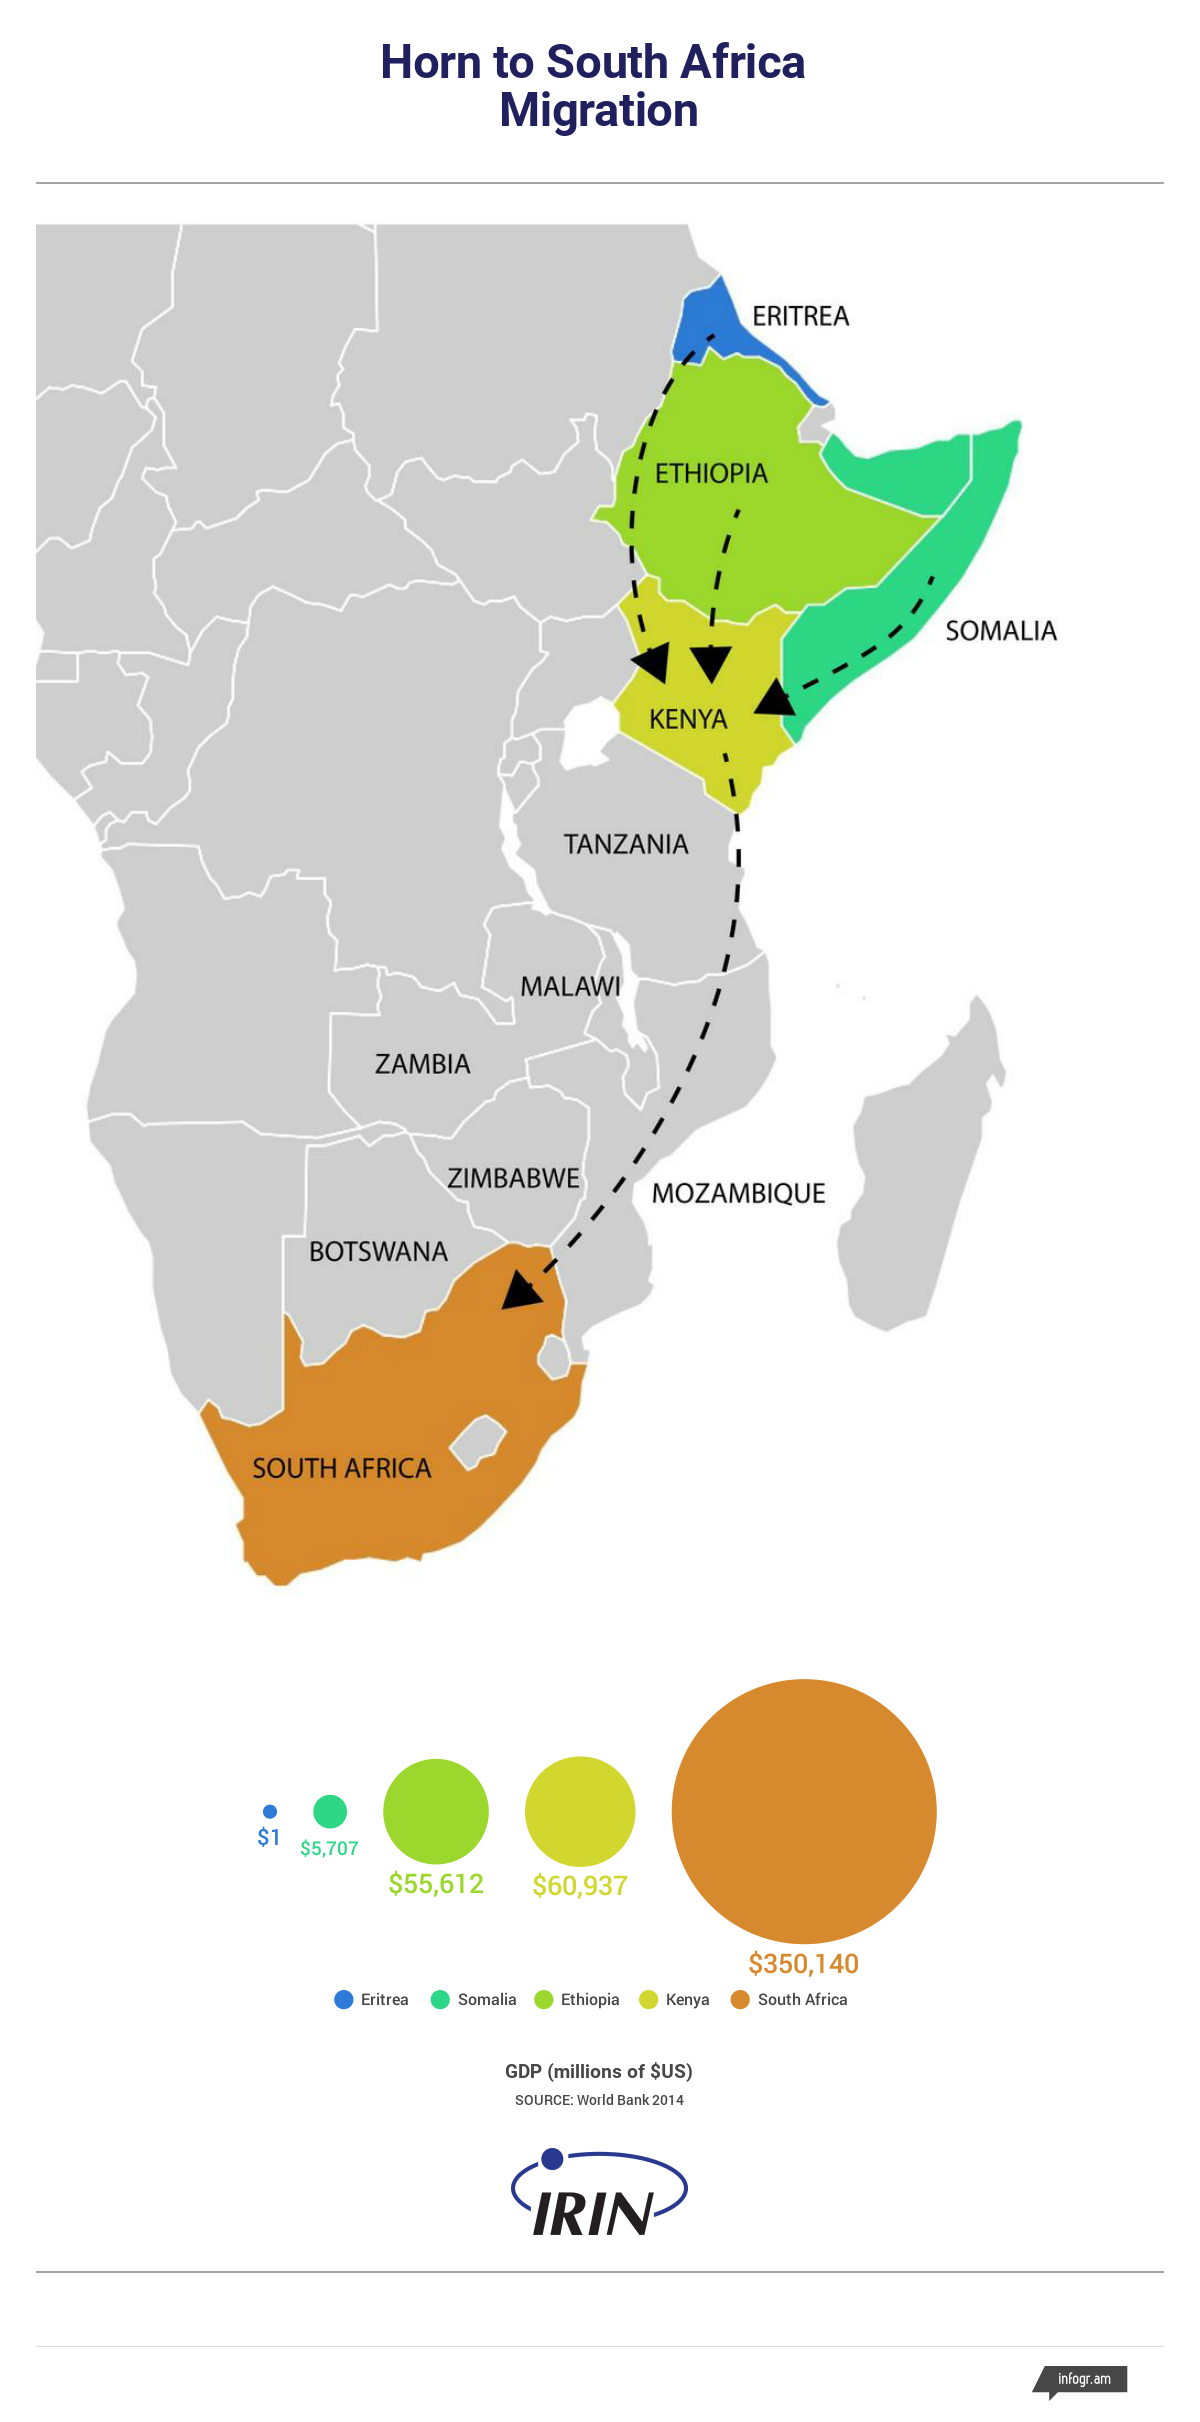 Horn to South Africa migration map